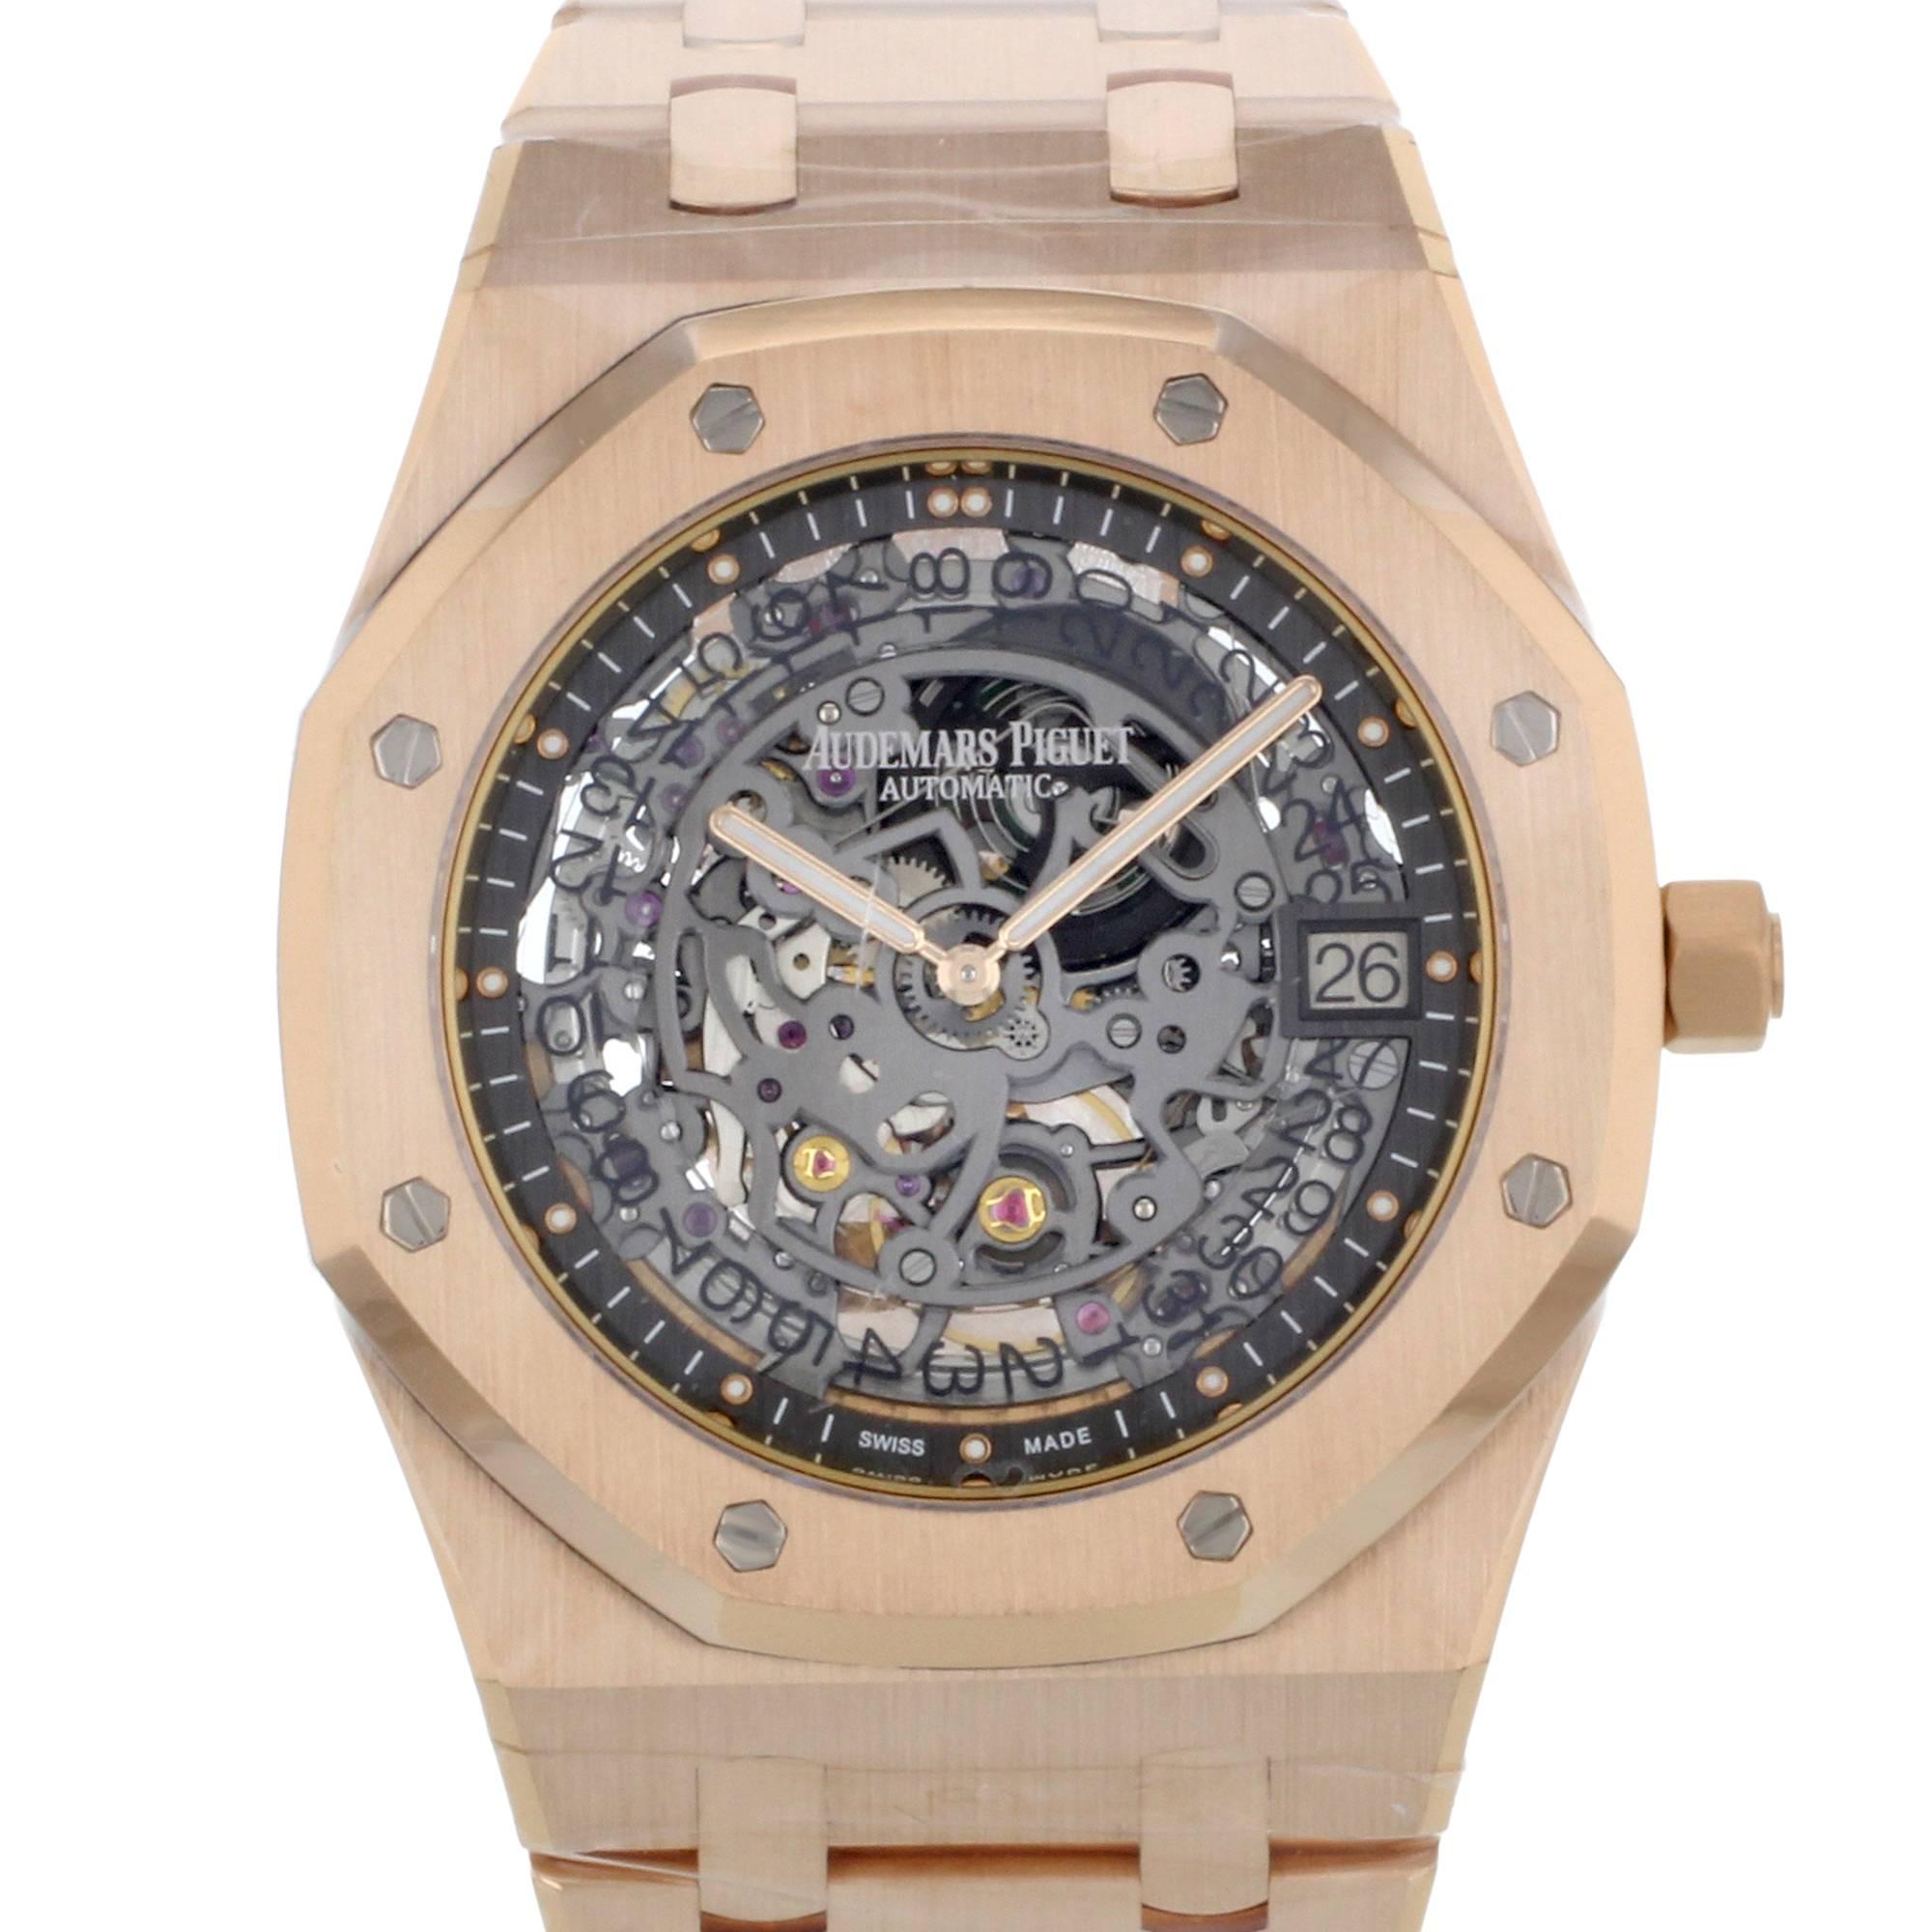 This brand new Audemars Piguet Royal Oak Openworked Extra-Thin  15204OR.OO.1240OR.01 is a beautiful men's timepiece that is powered by an automatic movement which is cased in a rose gold case. It has a octagonal shape face, date dial and has hand